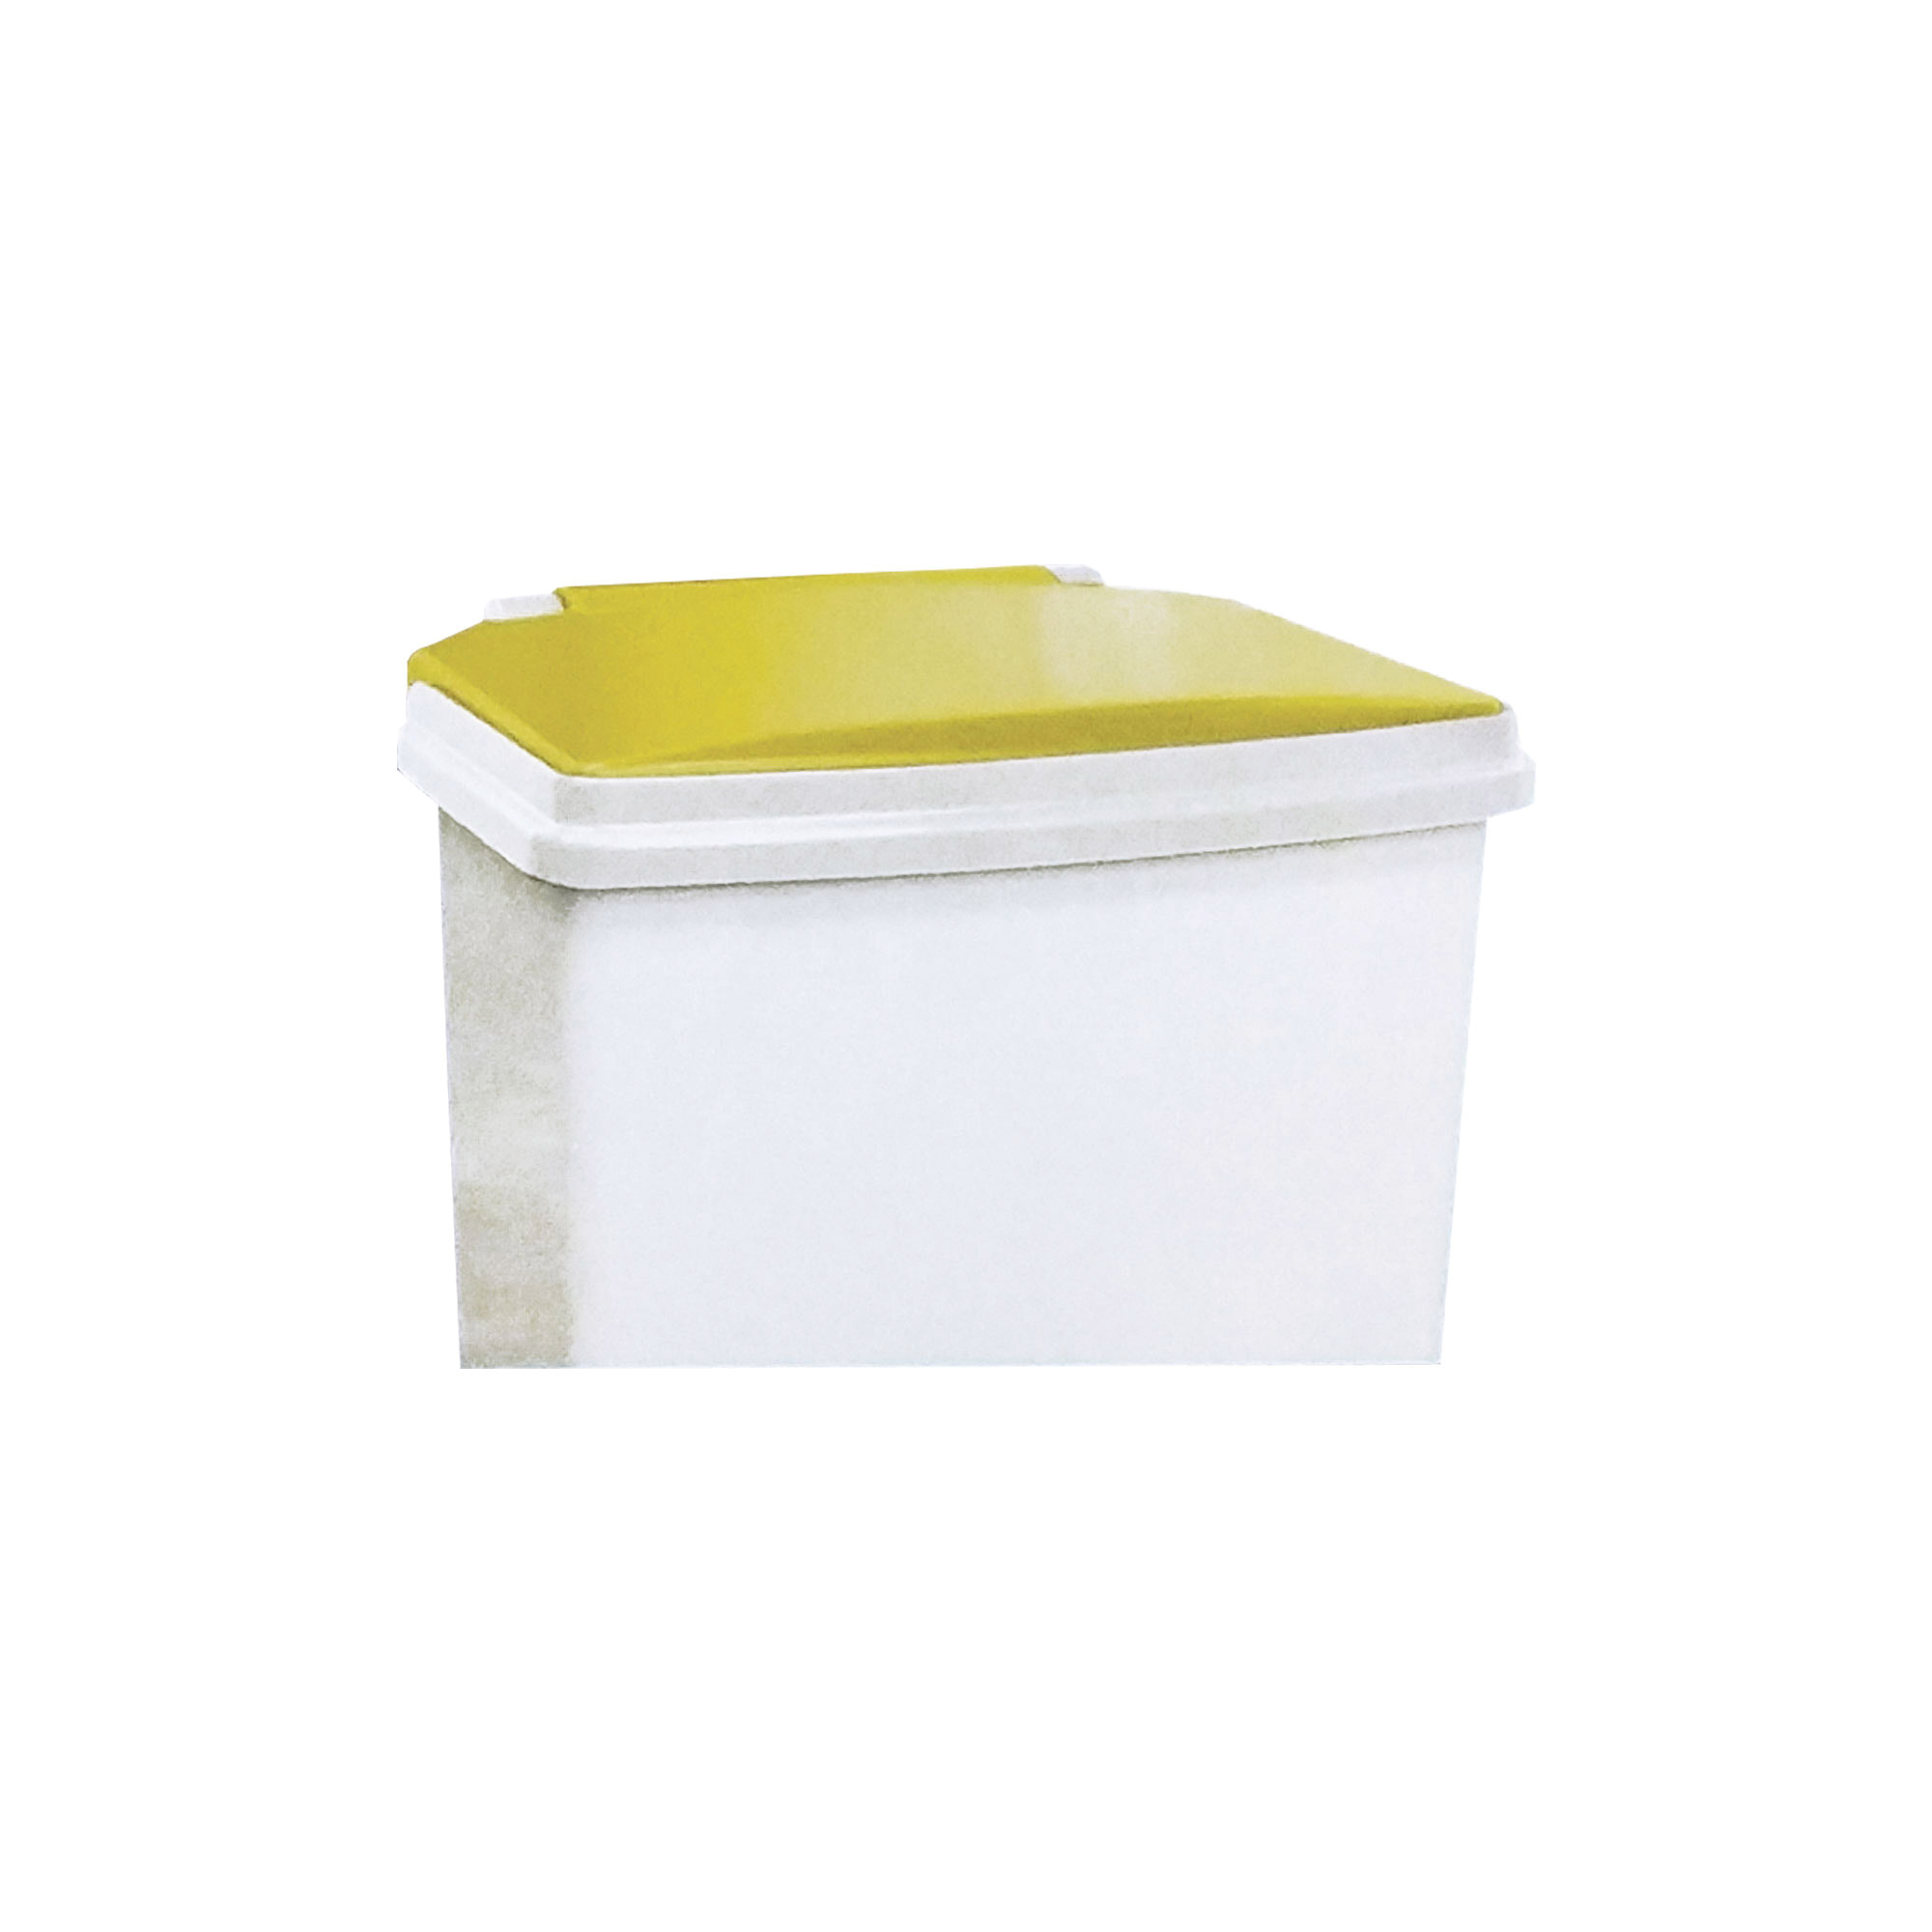 Yellow Replacement Lid For EB-3295